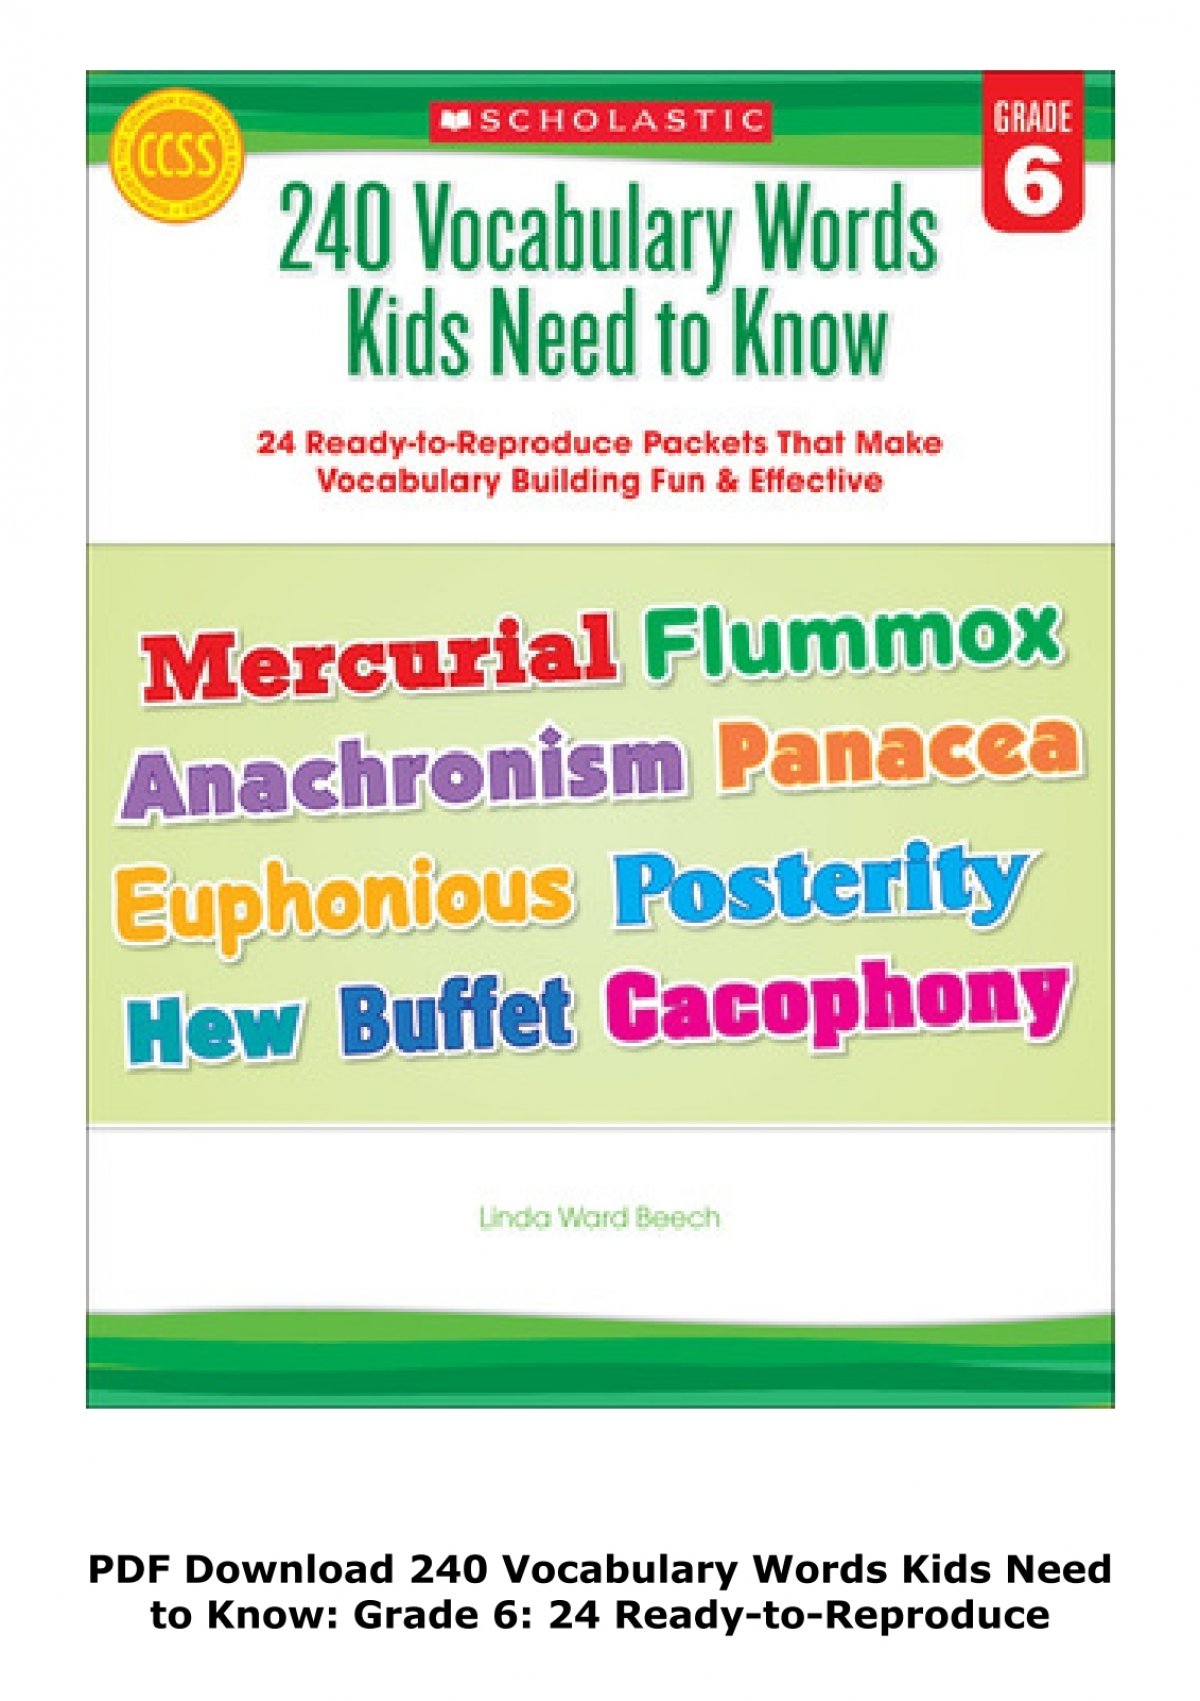 pdf-download-240-vocabulary-words-kids-need-to-know-grade-6-24-ready-to-reproduce-packets-that